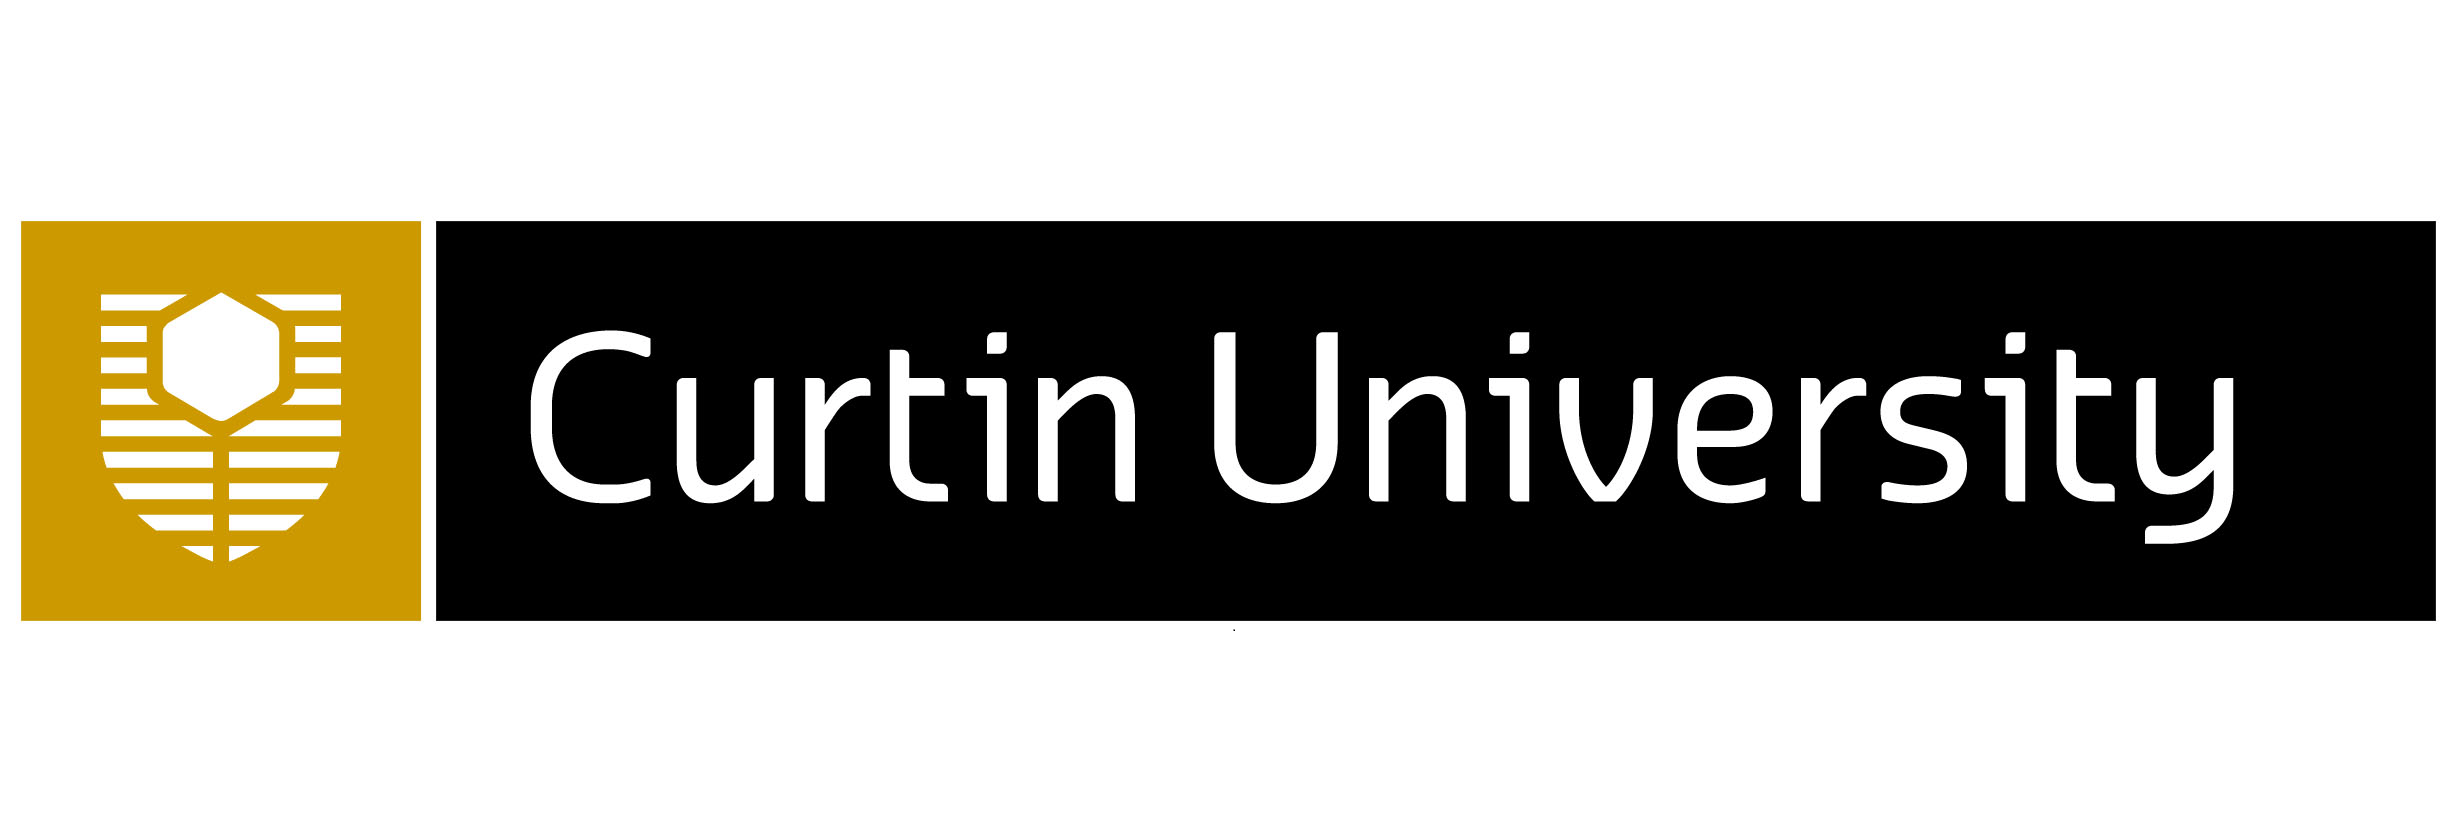 Graduate Certificate in Corrosion Engineering (OpenUnis) | Graduate diploma / certificate | Engineering & Technology | On Campus | 1 year | Curtin University | Australia